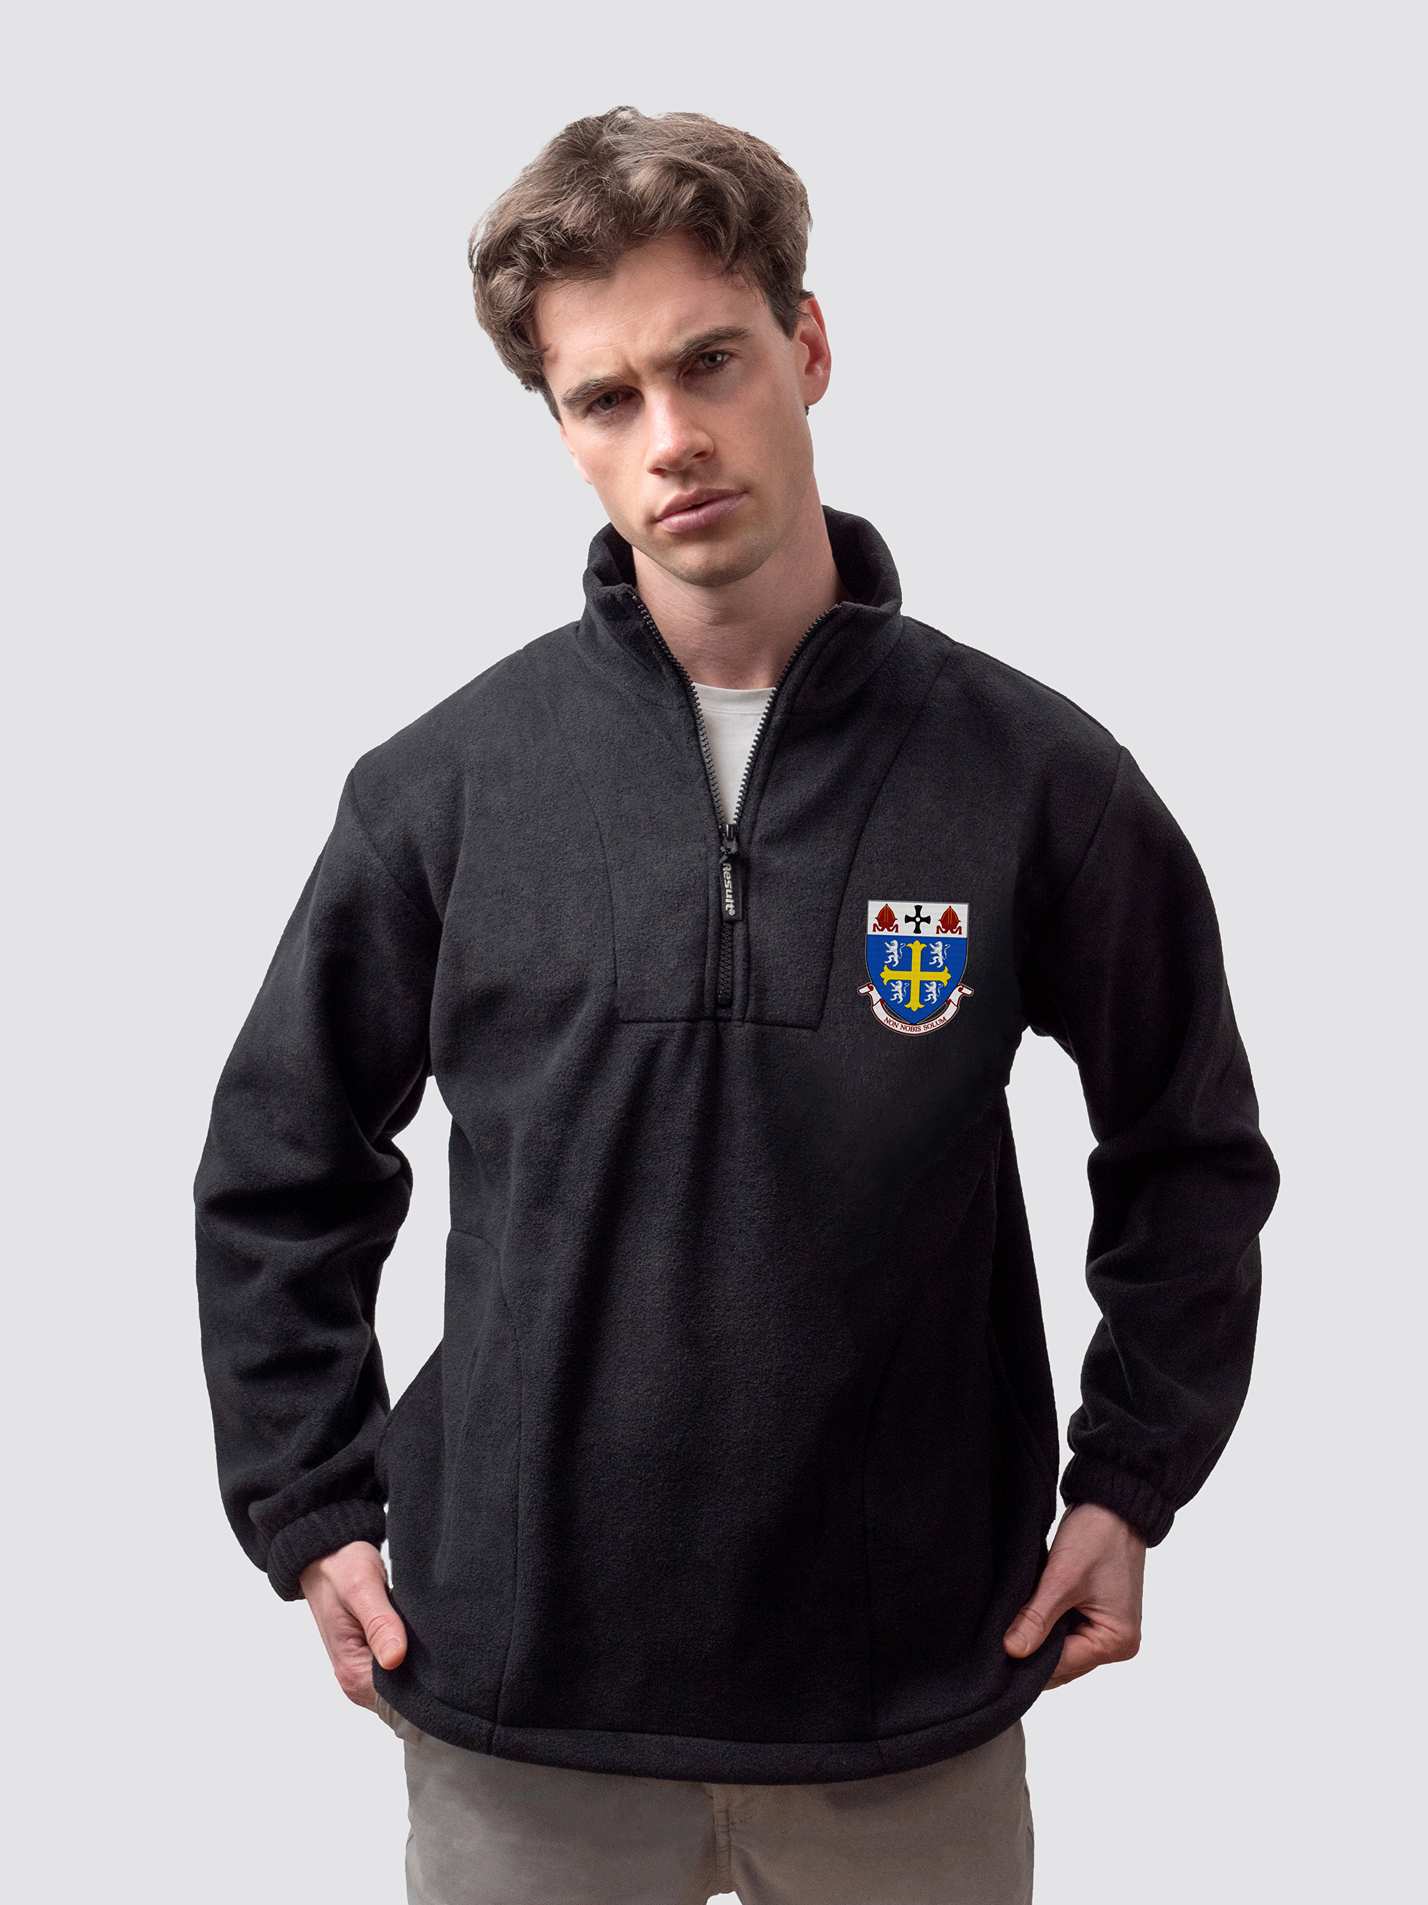 Durham University fleece, with custom embroidered initials and University College crest